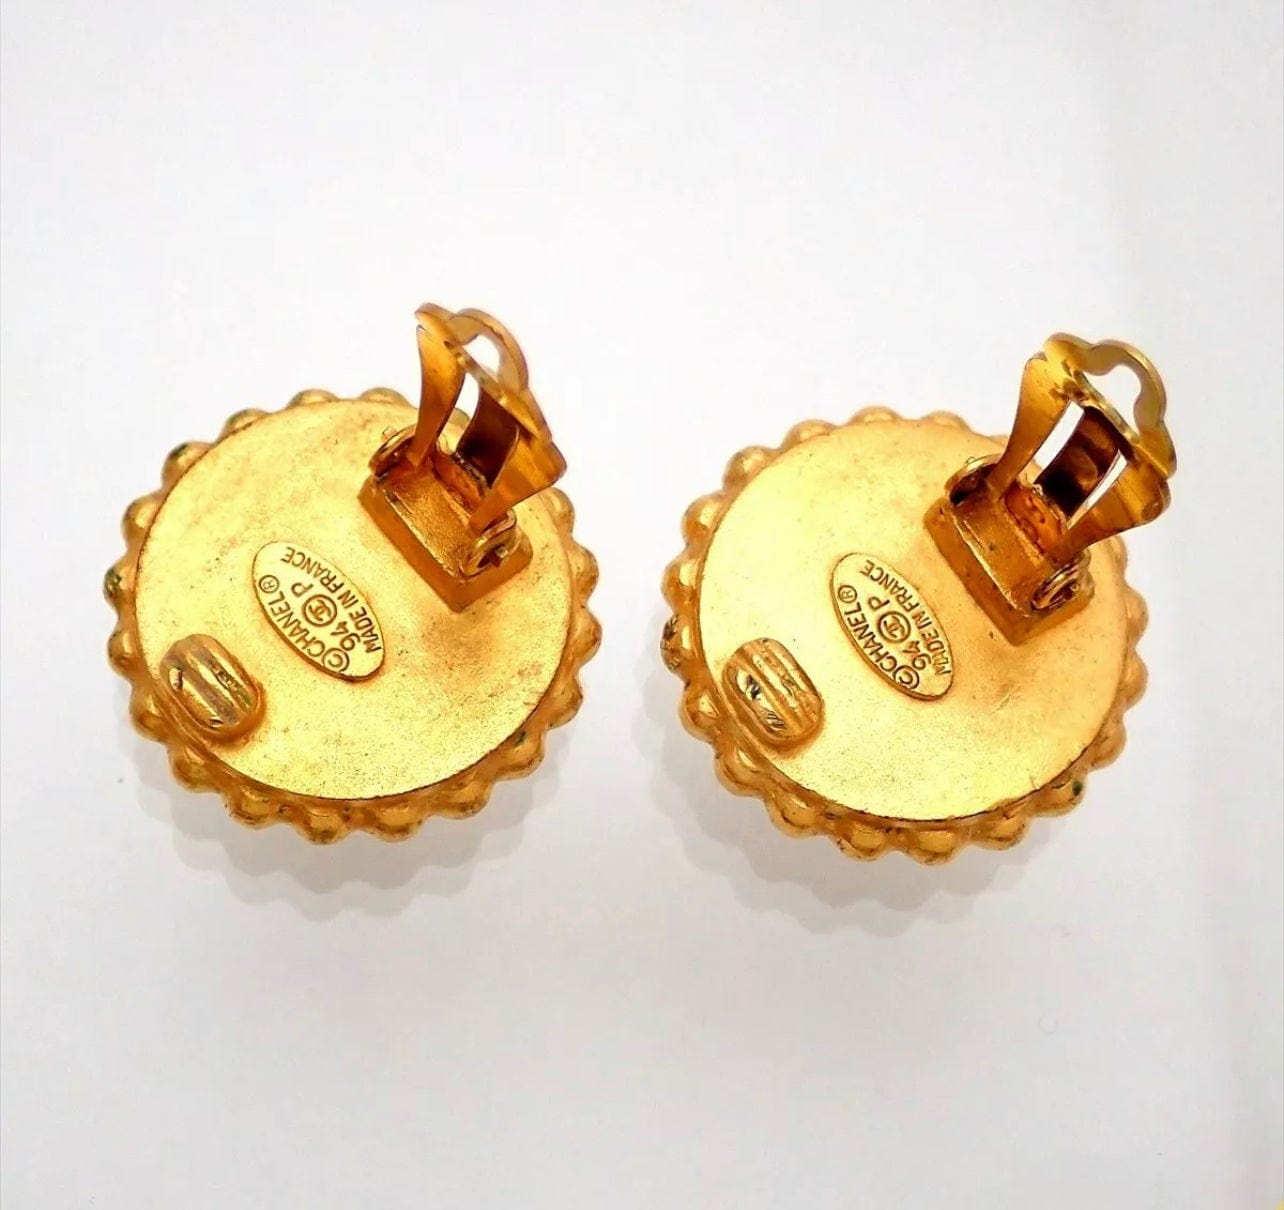 LuxuryPromise Chanel large black and gold CC earrings